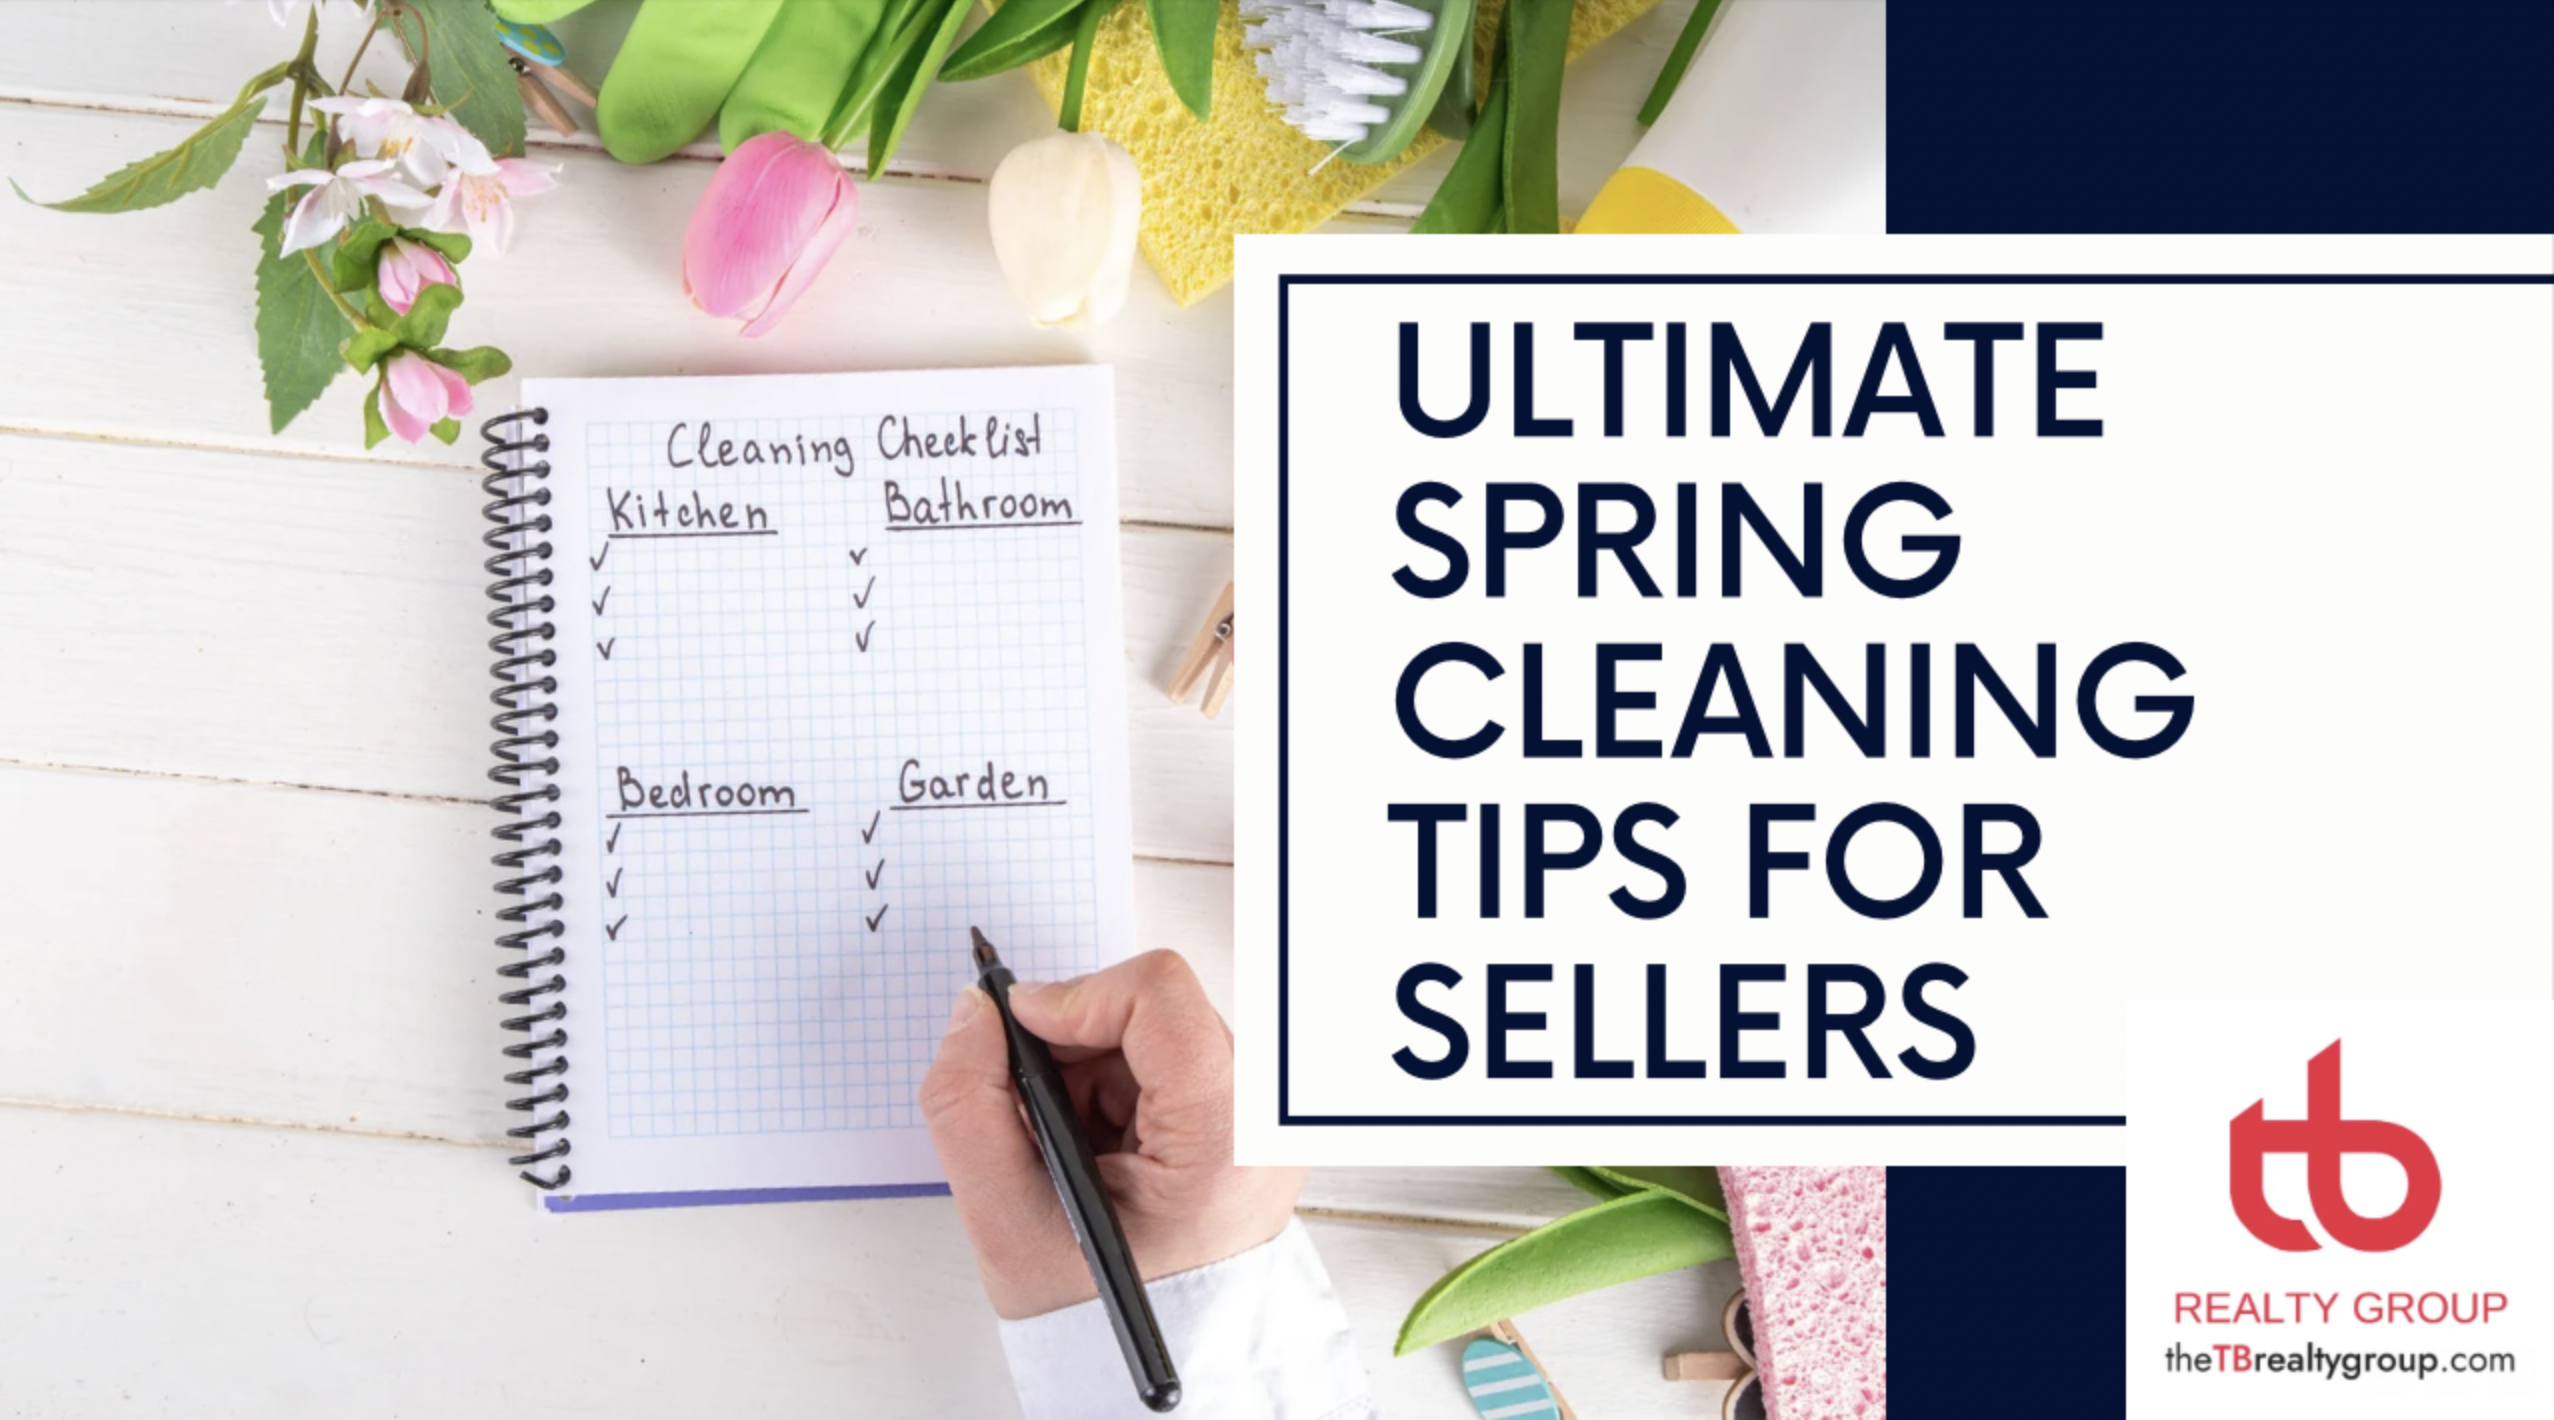 Ultimate Spring Cleaning Tips For Sellers